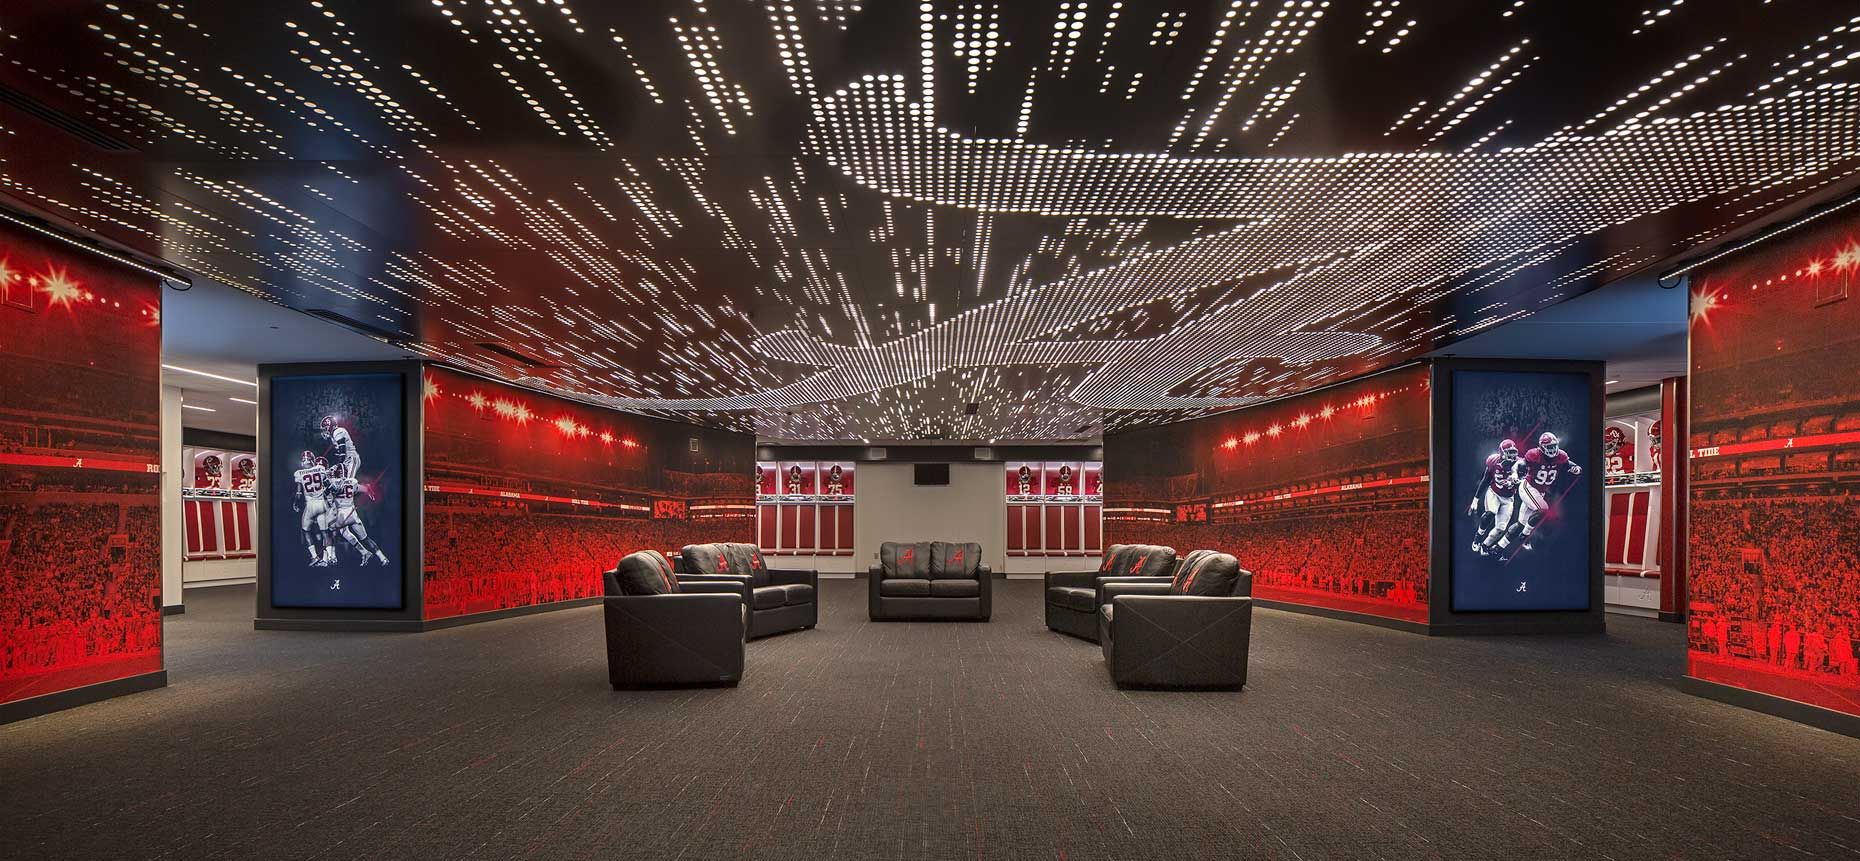 A symmetrical view of the locker room at the Univ. of Alabama, showing the custom ceiling graphics